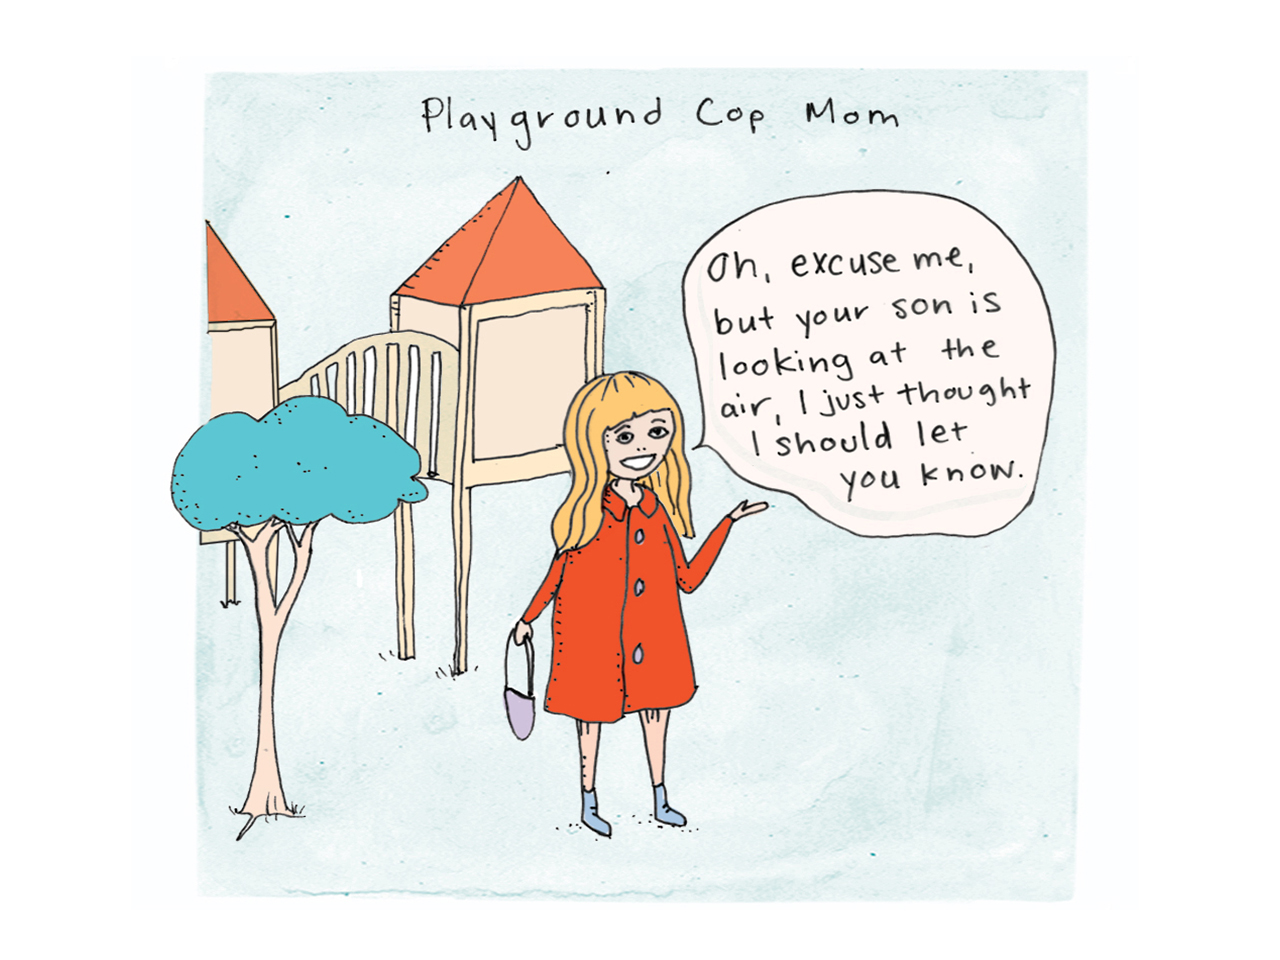 Illustration of a mom in a red coat with a speech bubble that reads, "Oh, excuse me, but your son is looking at the air. I just thought I should let you know" Caption reads Playground Cop Mom